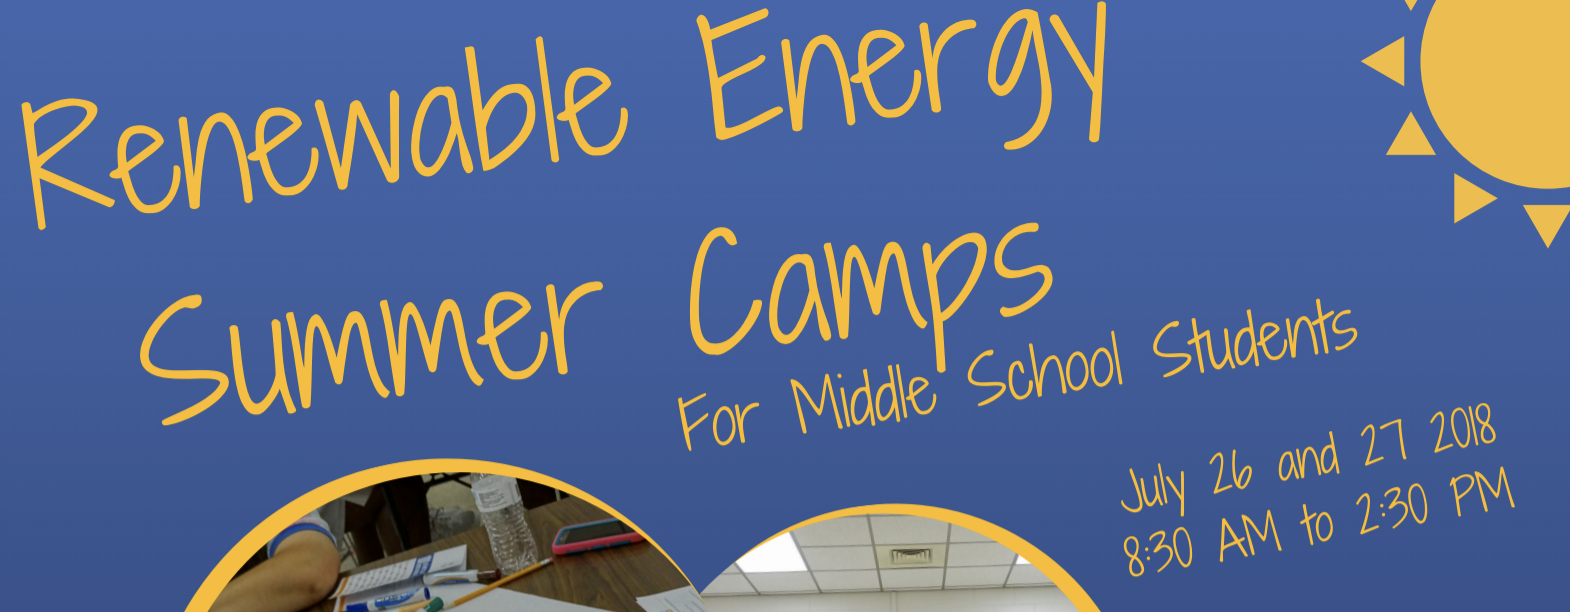 Solar Education Summer Camps (July 26-27)